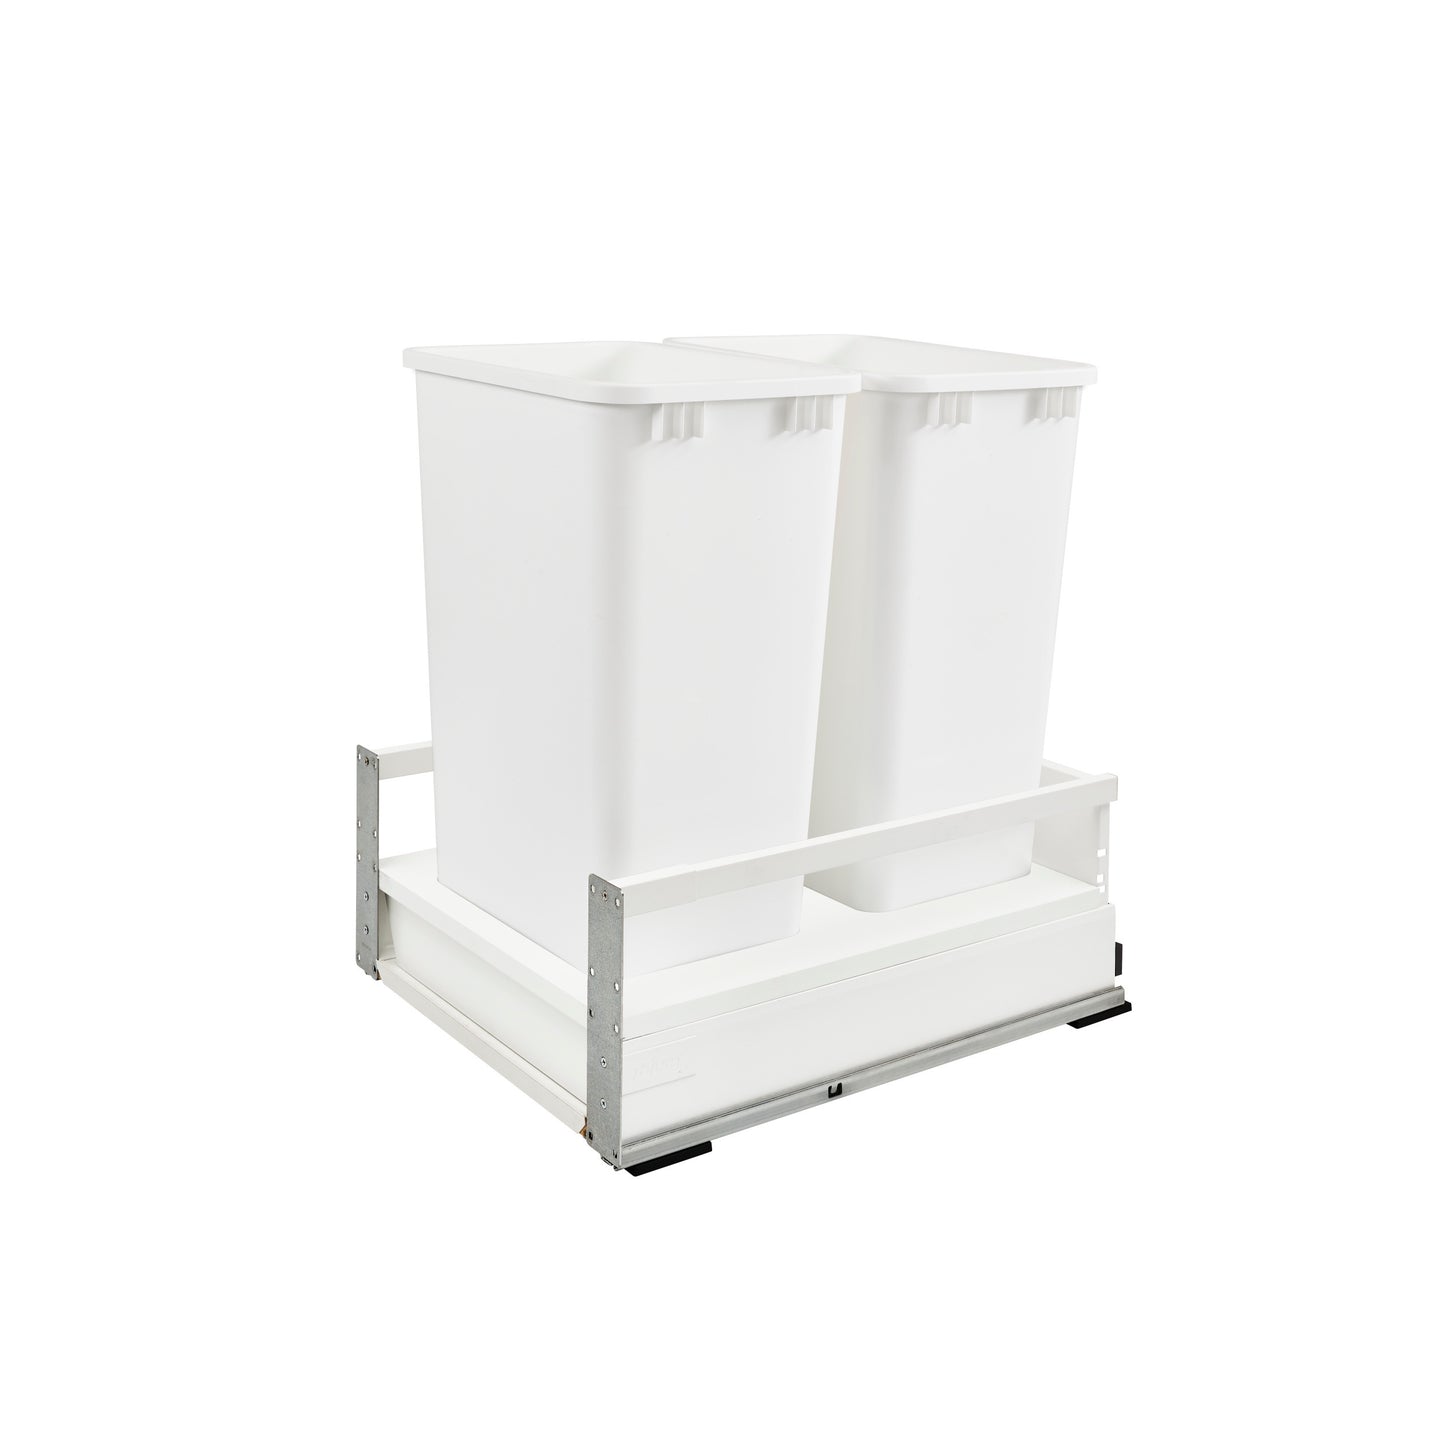 Rev-A-Shelf / TWCSD-18DM-2 / Tandem Pullout Waste/Trash Container w/ Soft-Close and SERVO-DRIVE System